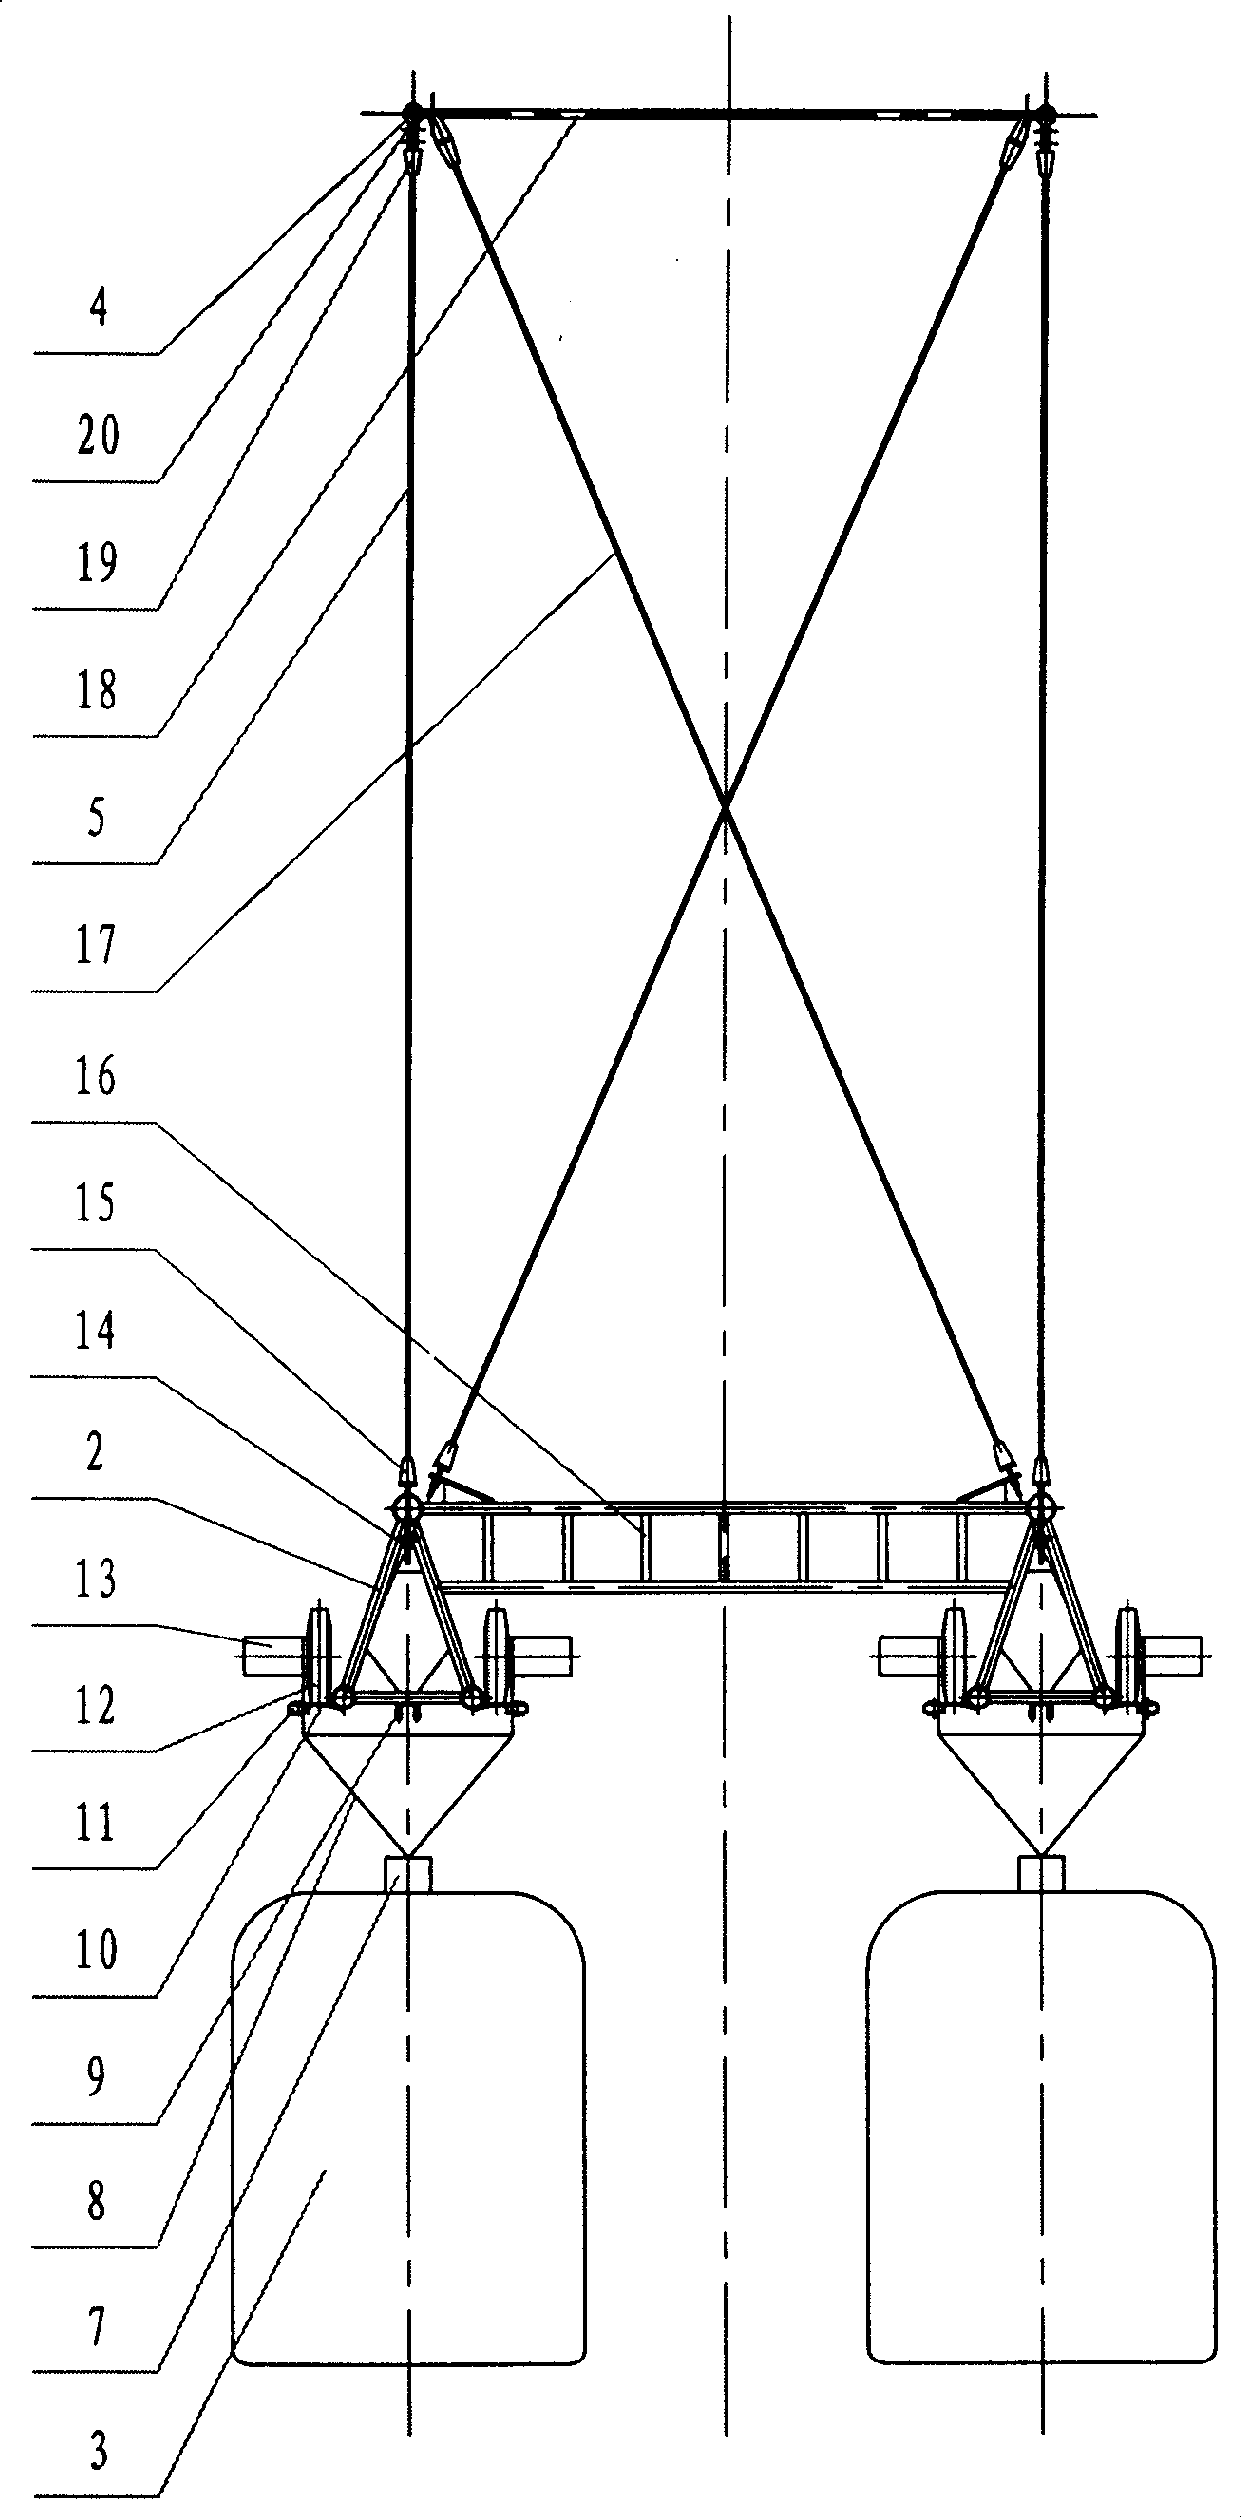 Suspension train traffic system with hanging rail